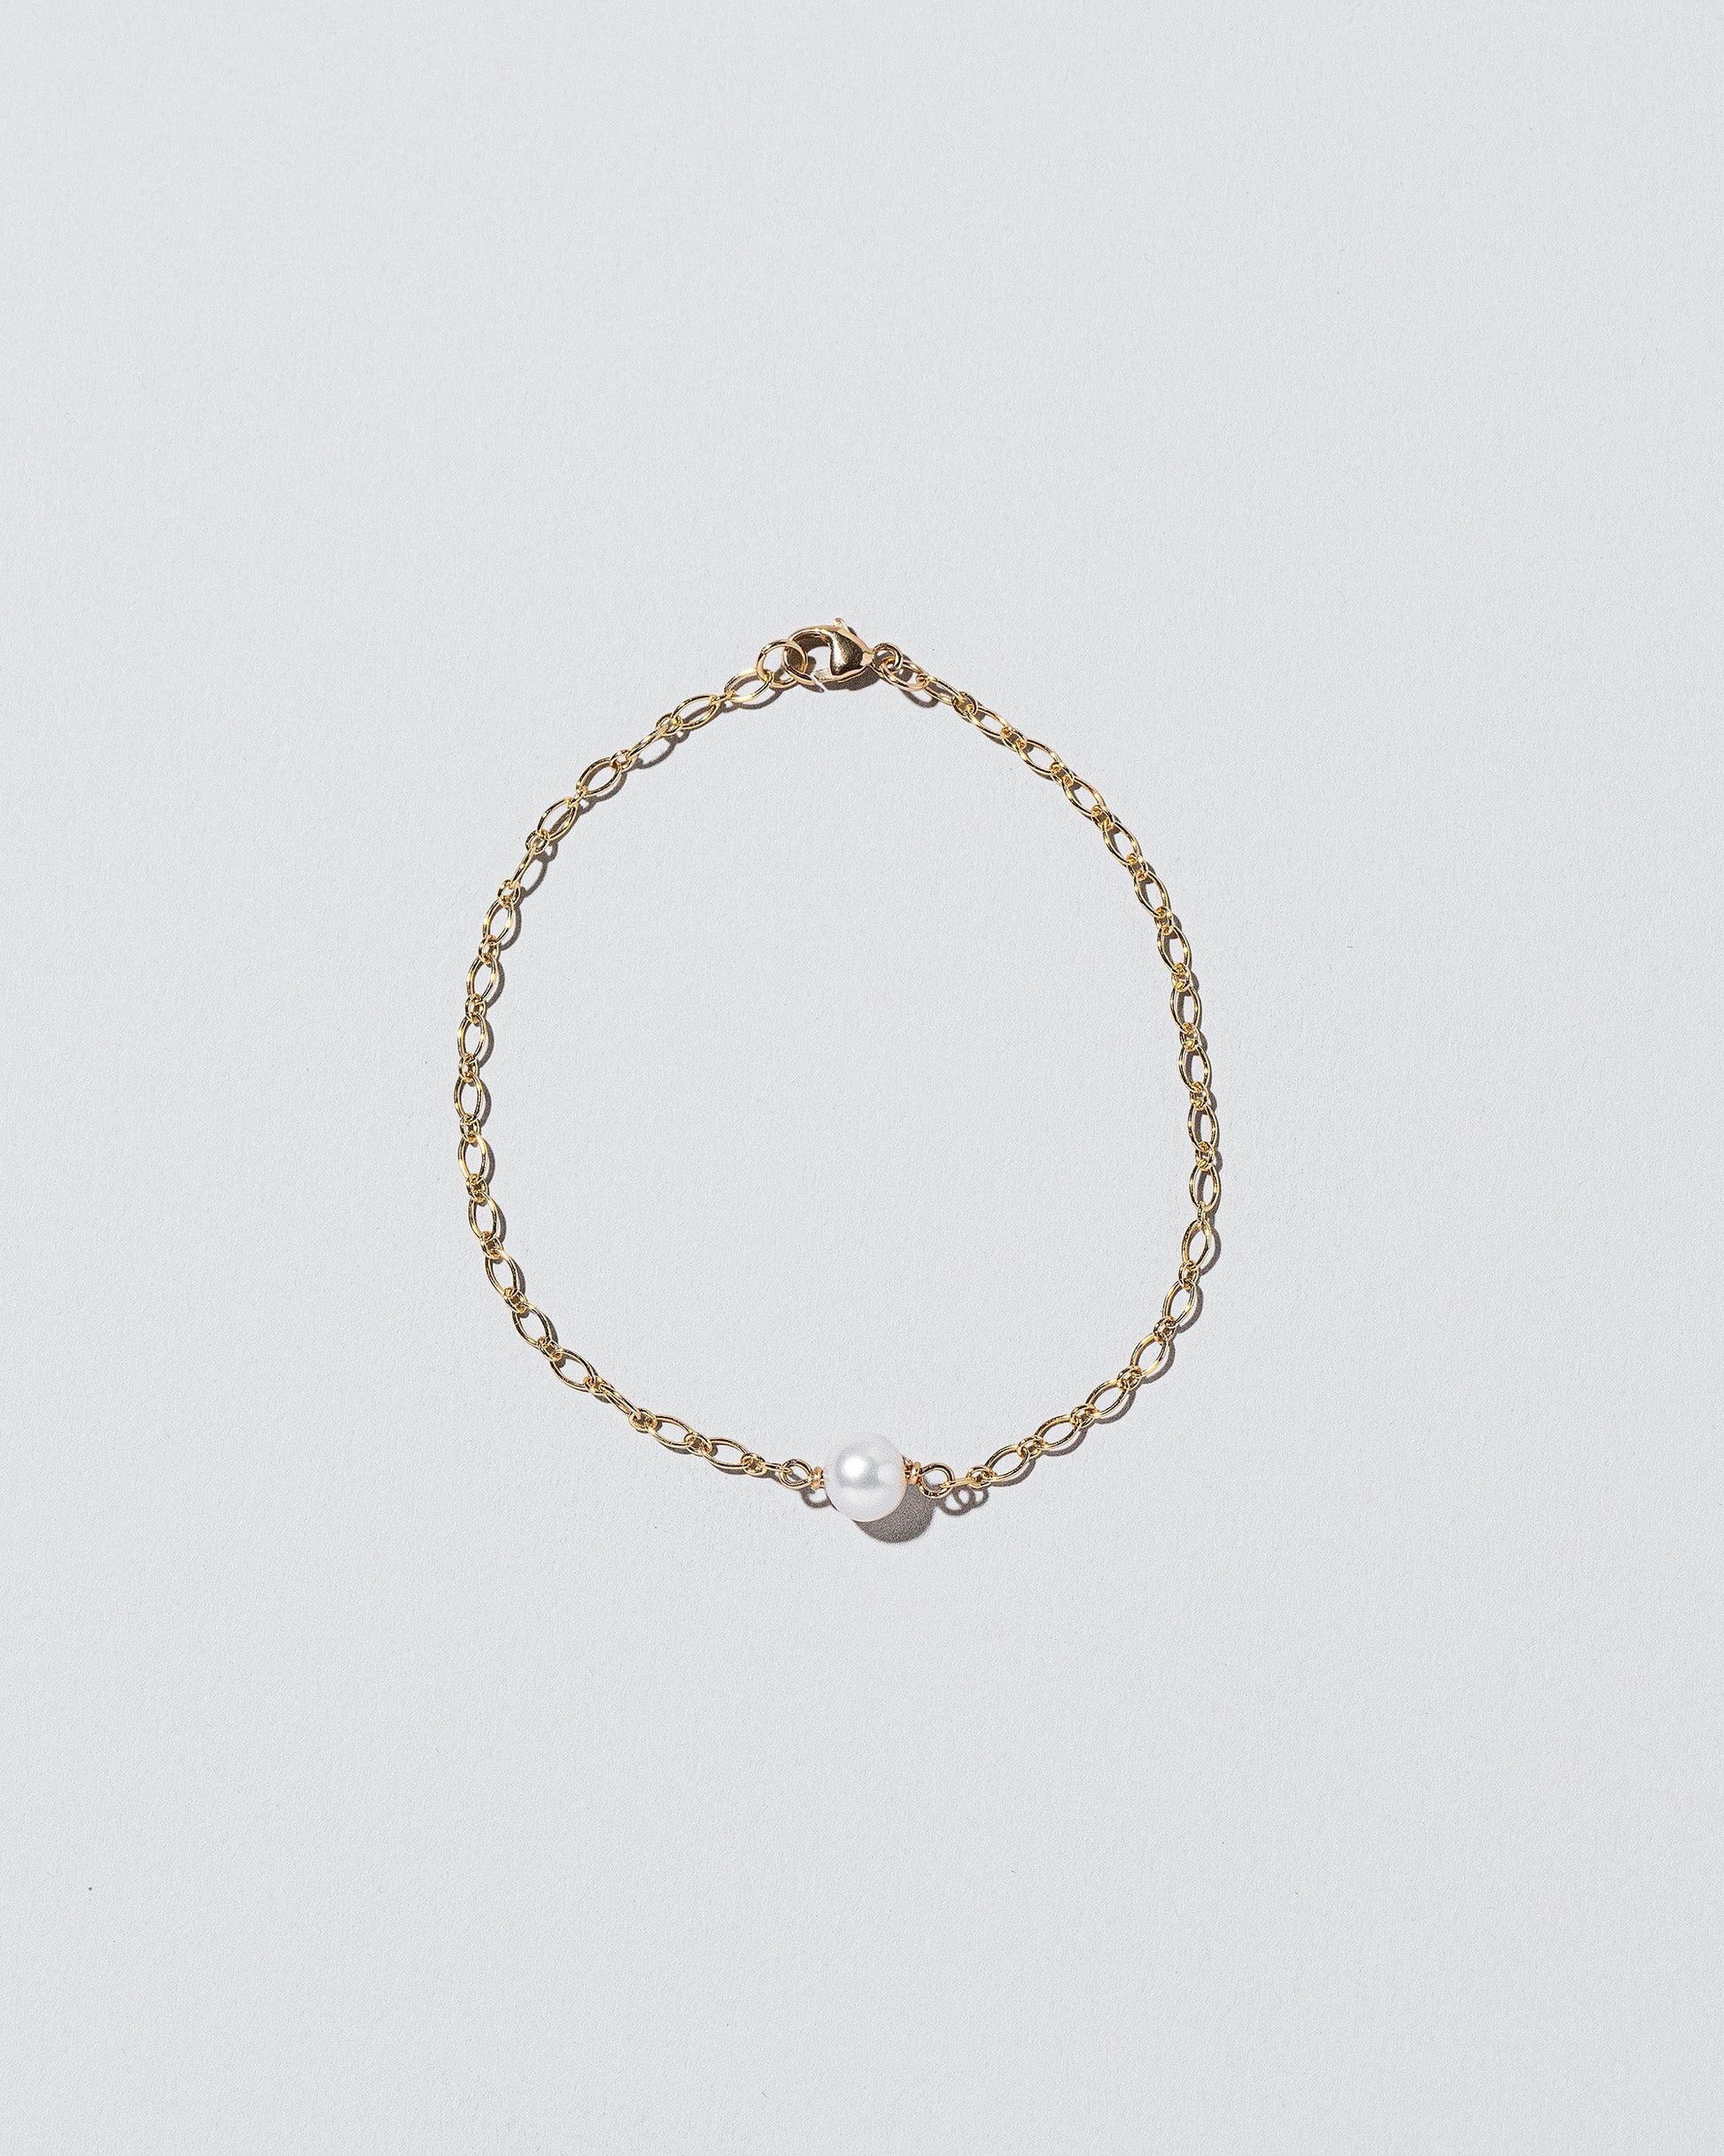 One Pearl Station Bracelet Open Oval Chain on light color background.